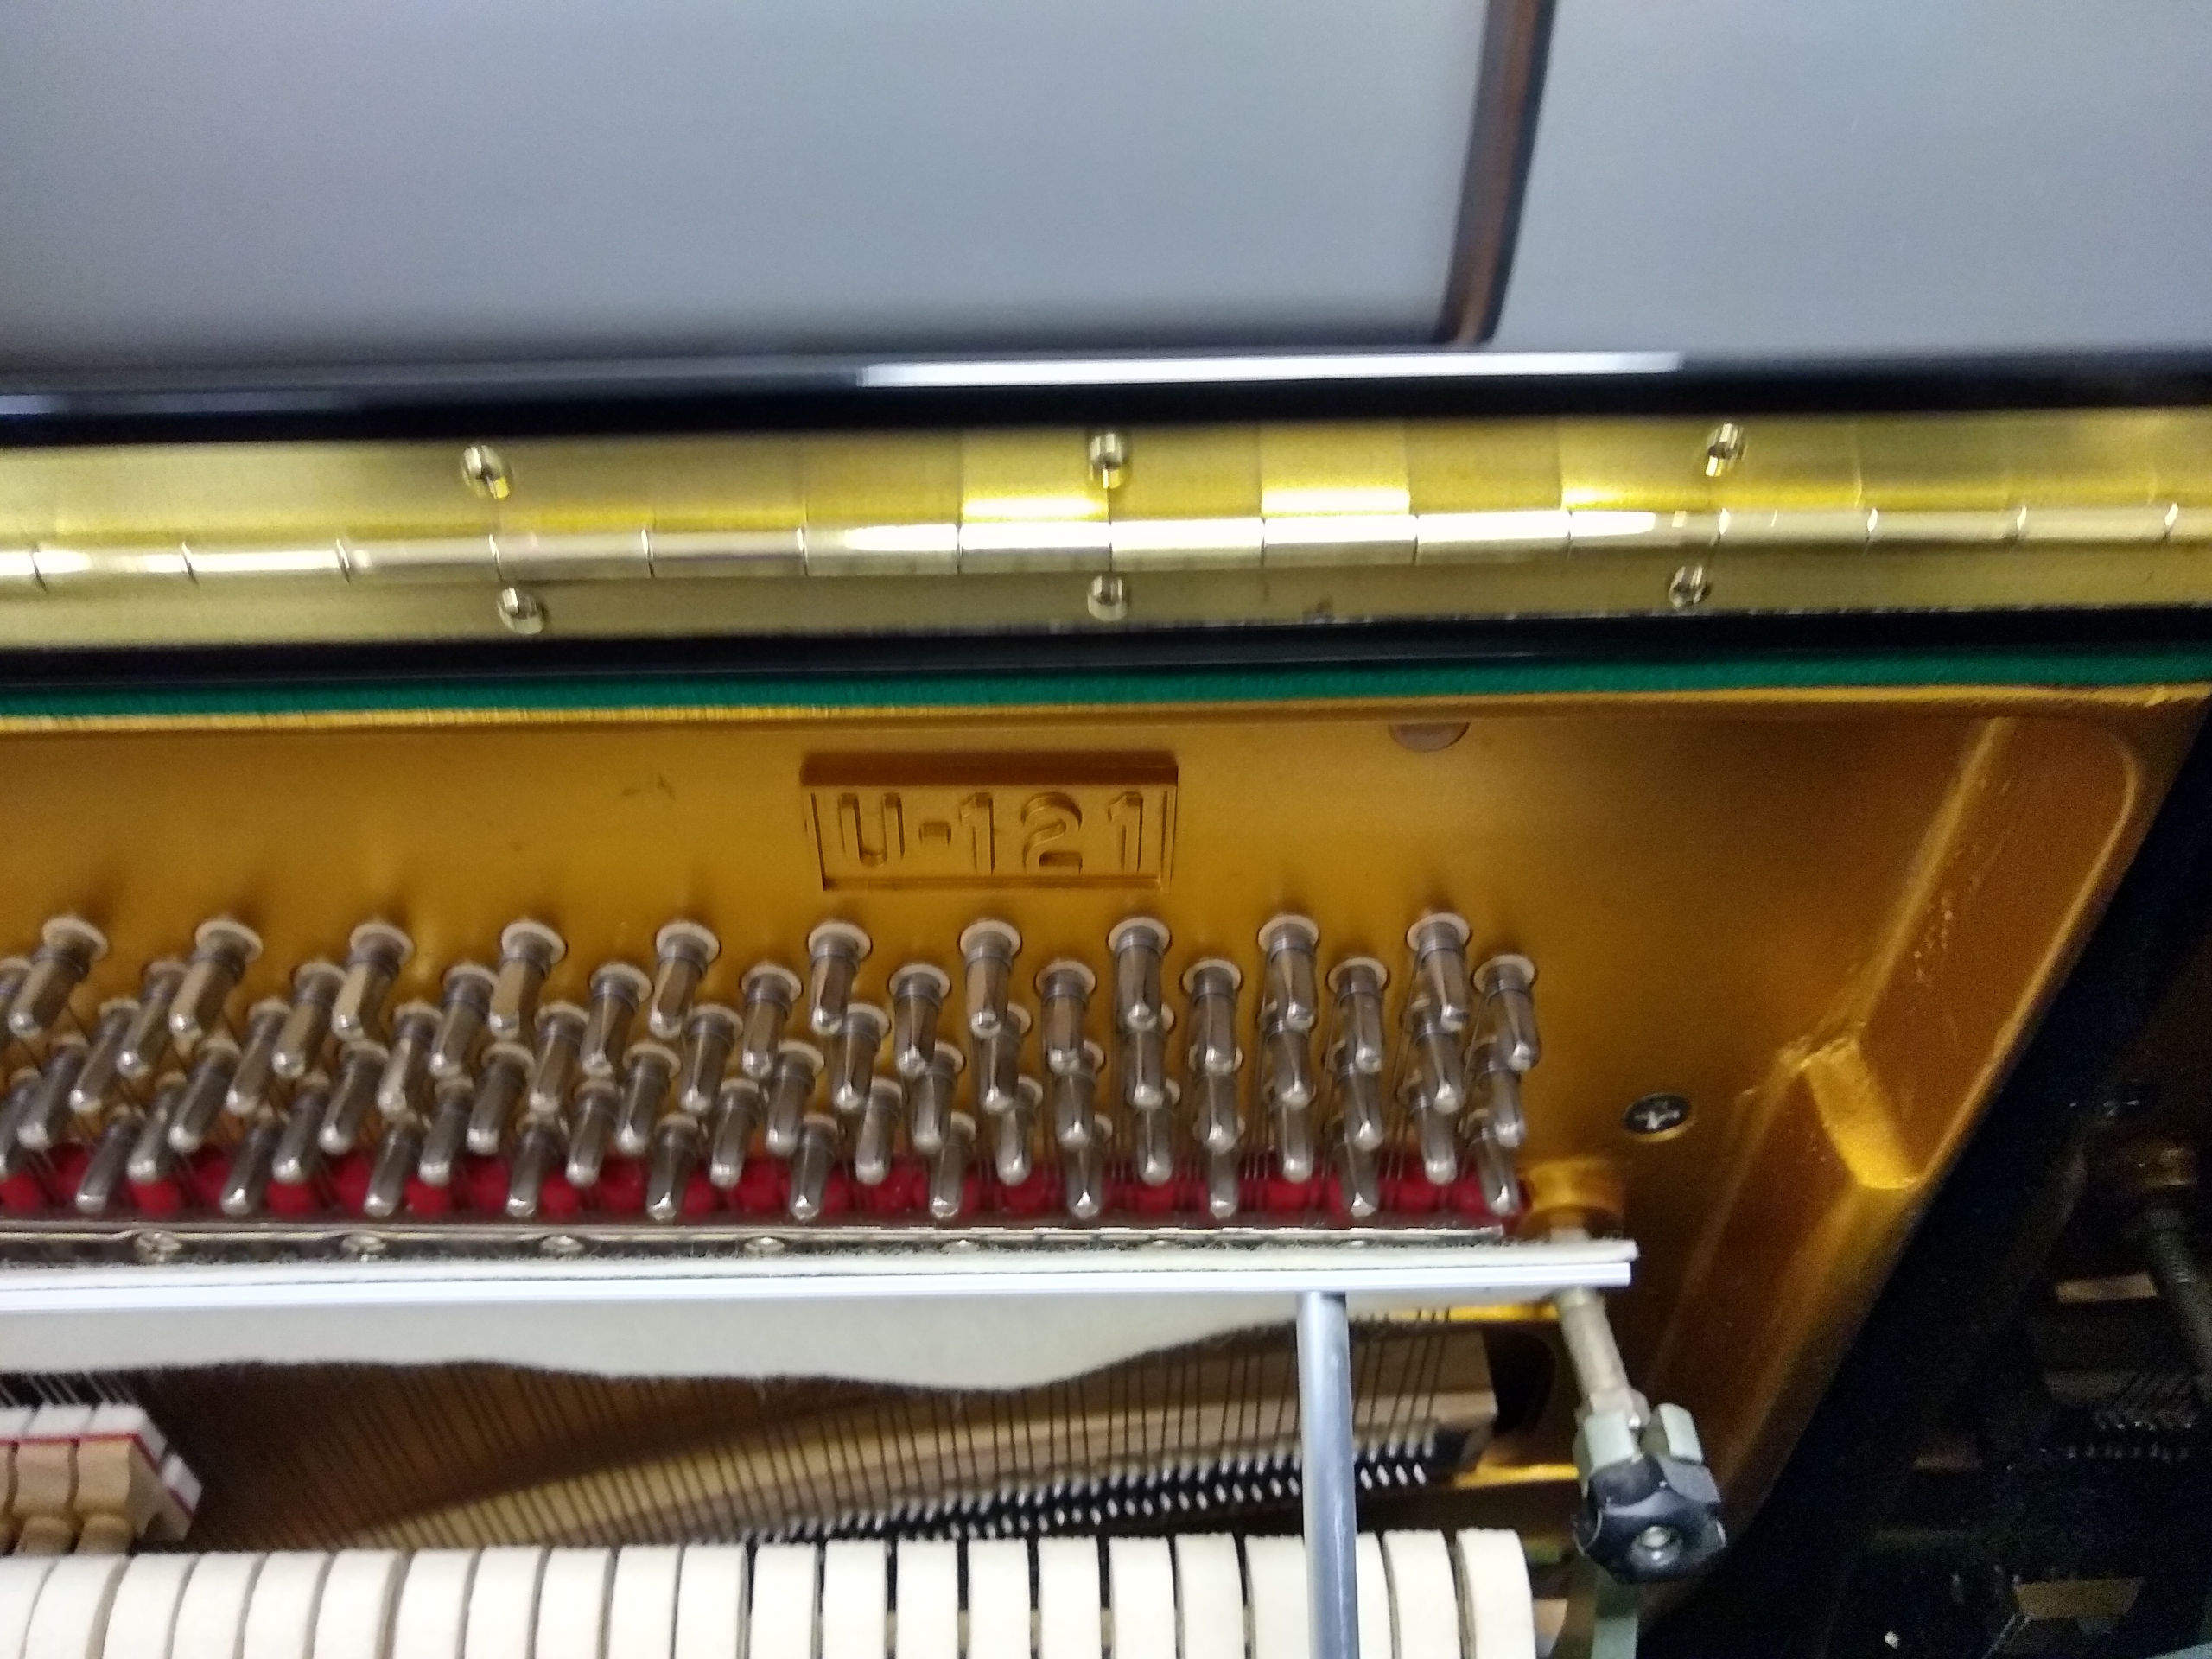 Young Chang Professional Upright Piano